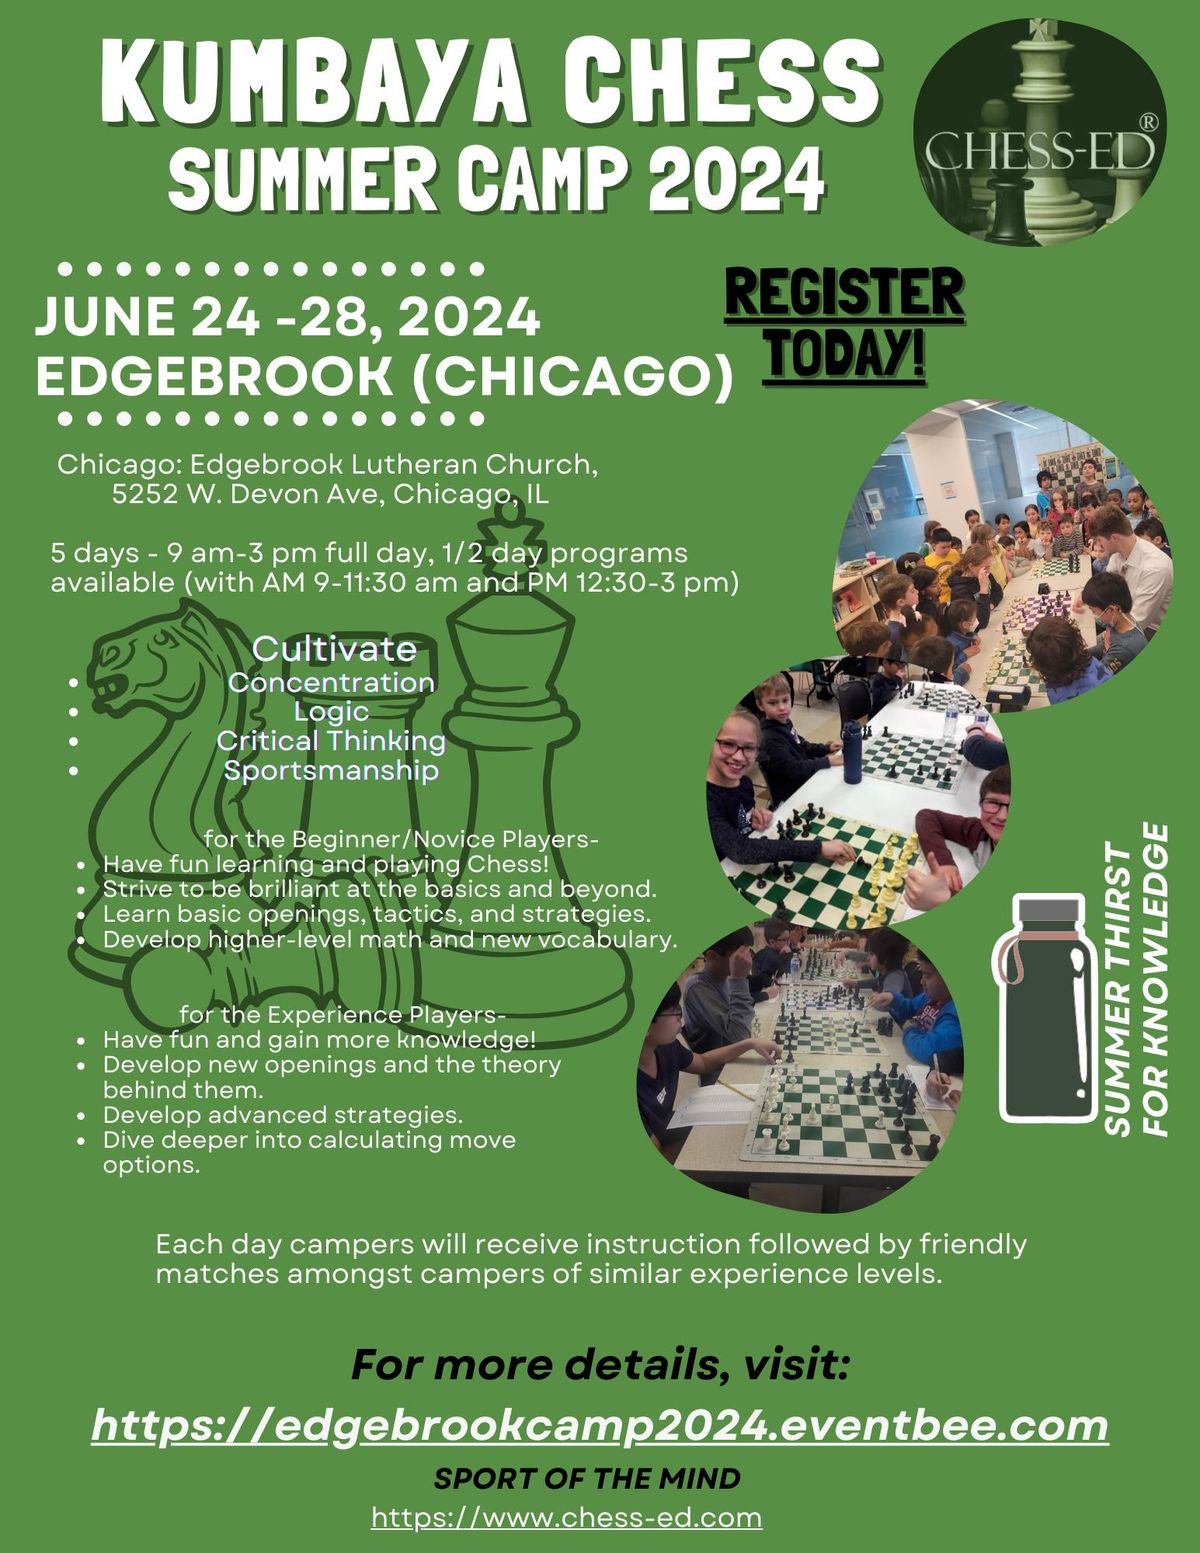 EDGEBROOK (CHICAGO) CHESS CAMP 2024- MAKE SURE TO MAKE PLANS FOR THE SUMMER- REGISTER TODAY! \u265f\ufe0f\u265f\ufe0f